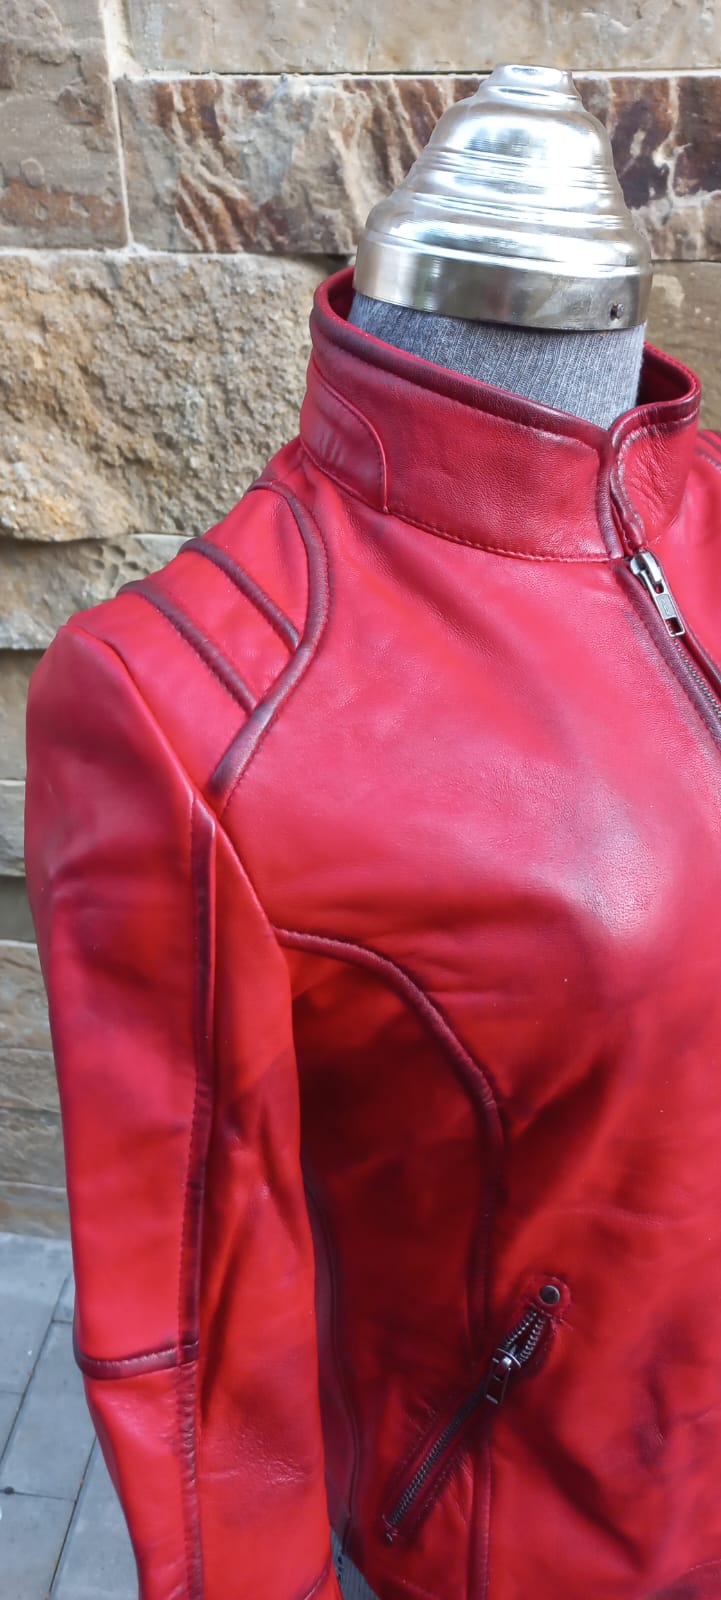 Vintage Hot Red Women's Leather Jacket